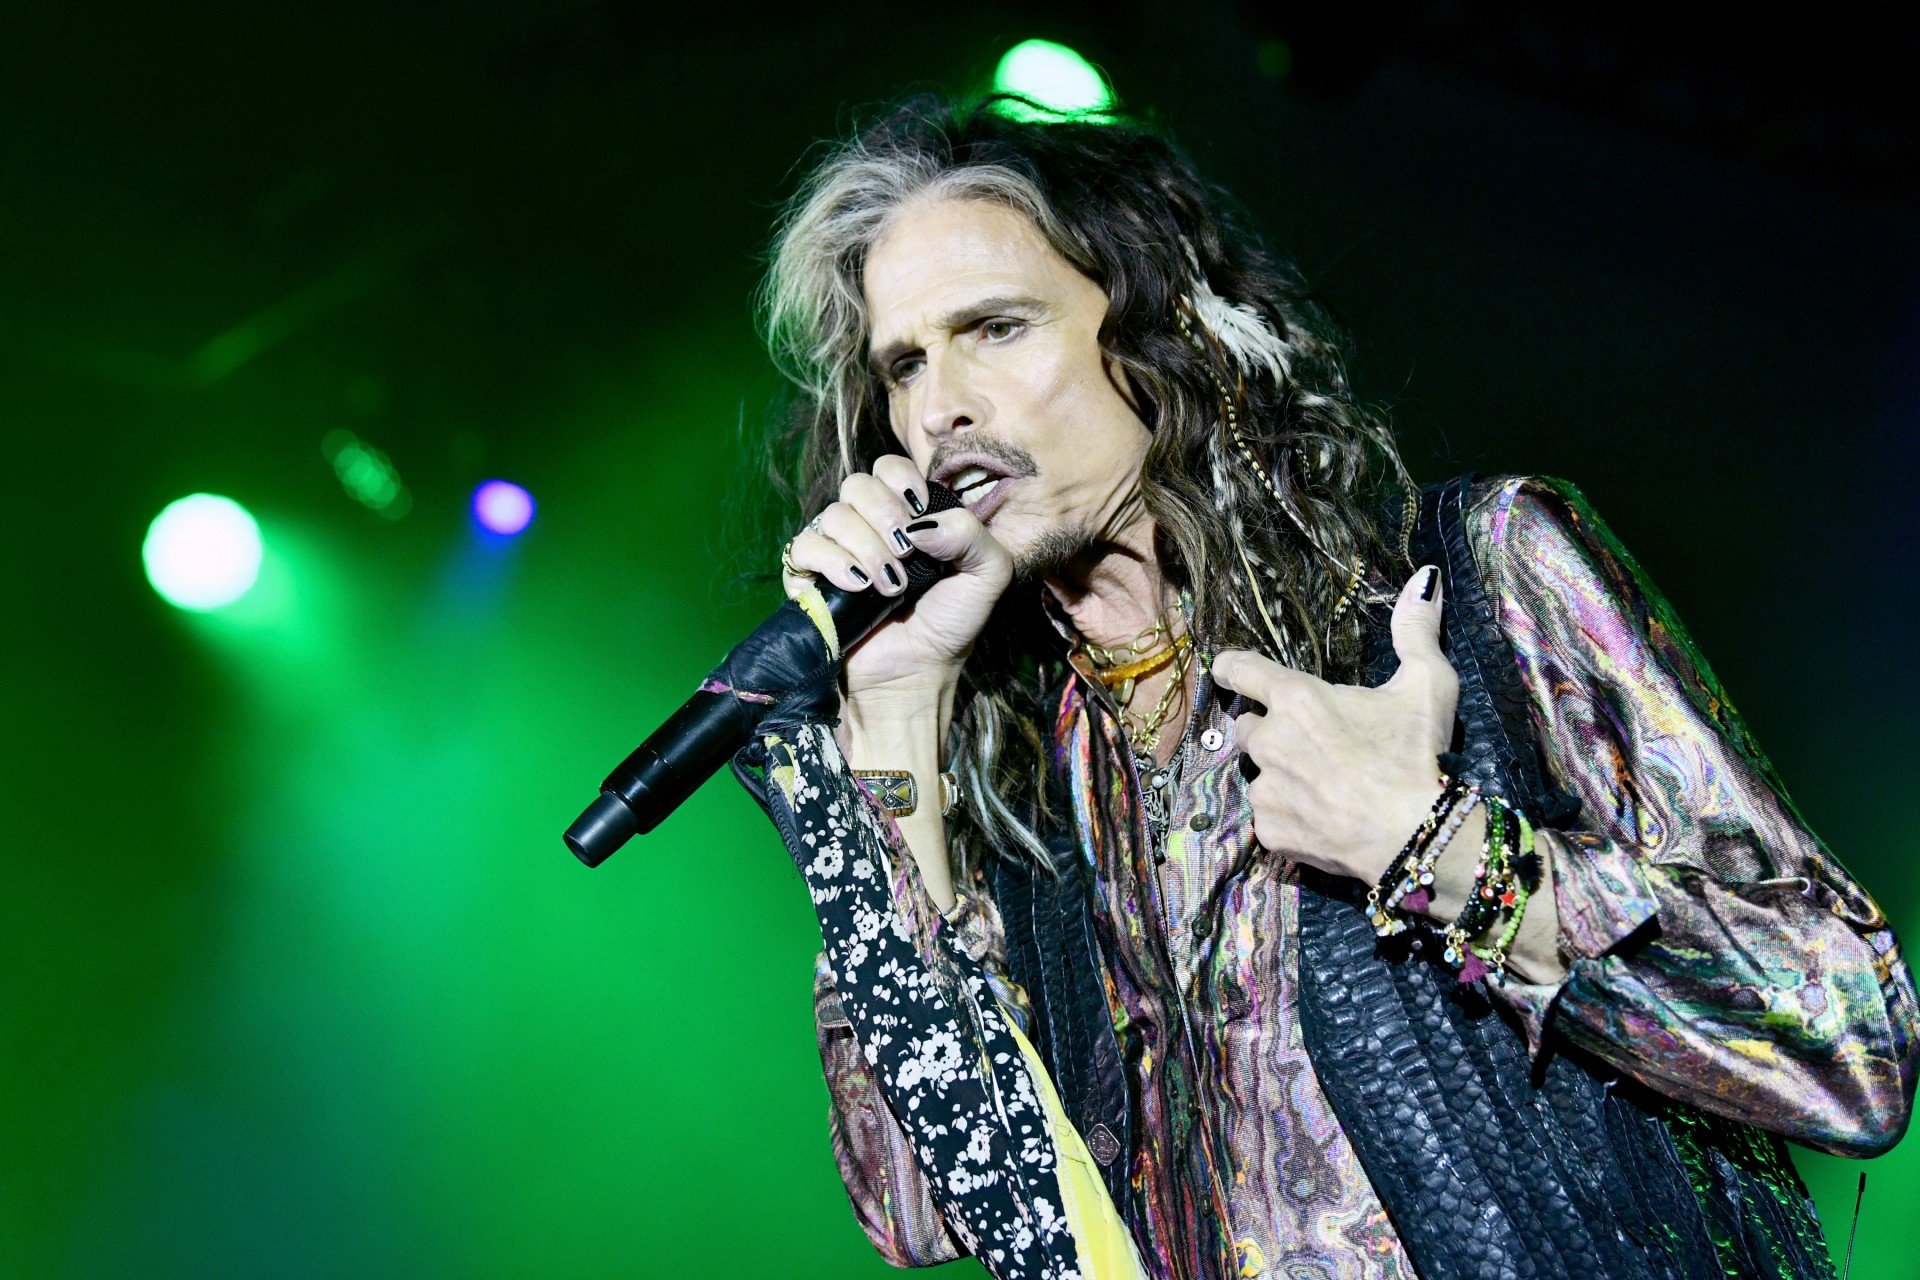 Aerosmith's Steven Tyler performs while holding a microphone and wearing a leather vest. 